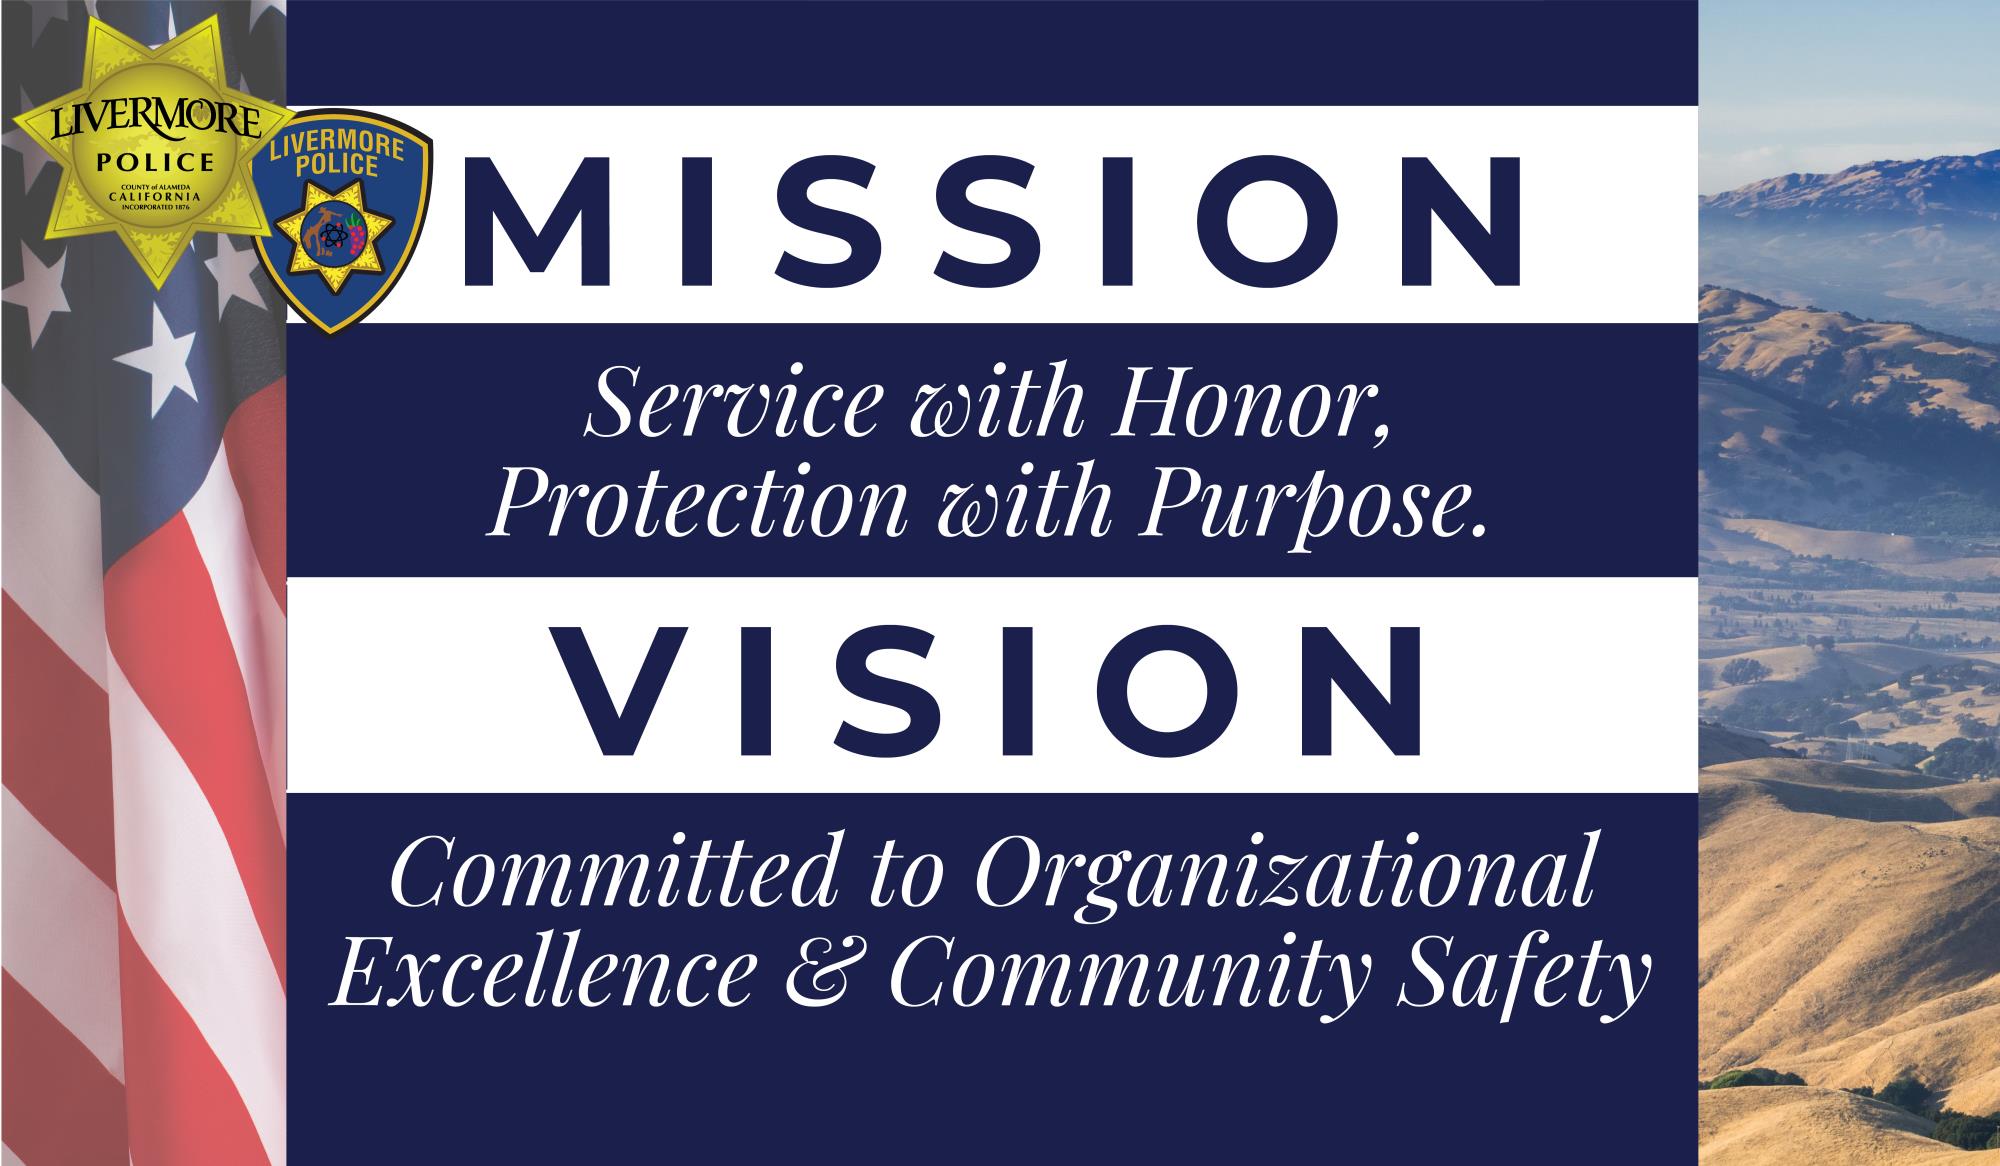 Livermore Police Department Mission and Vision